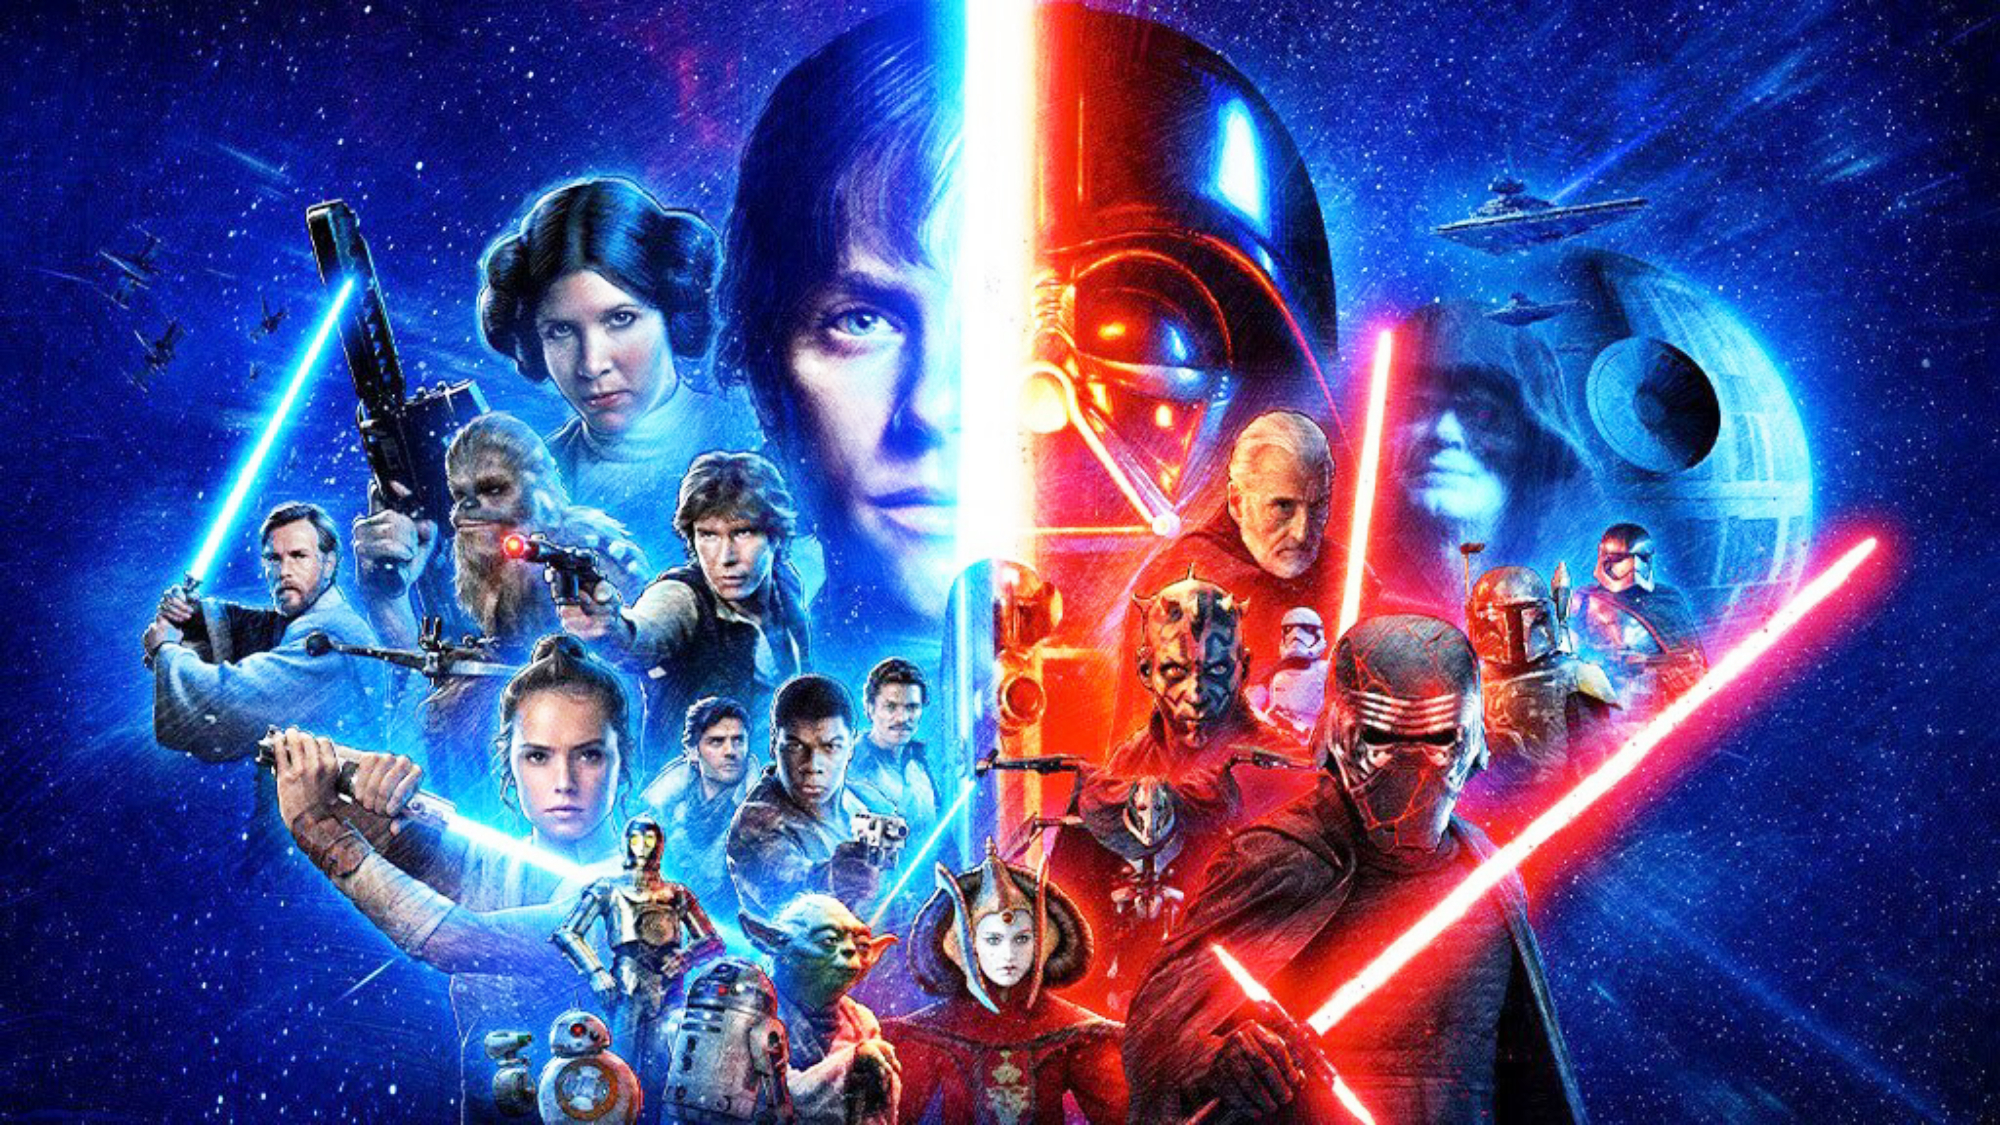 Star Wars poster representing the light and dark side